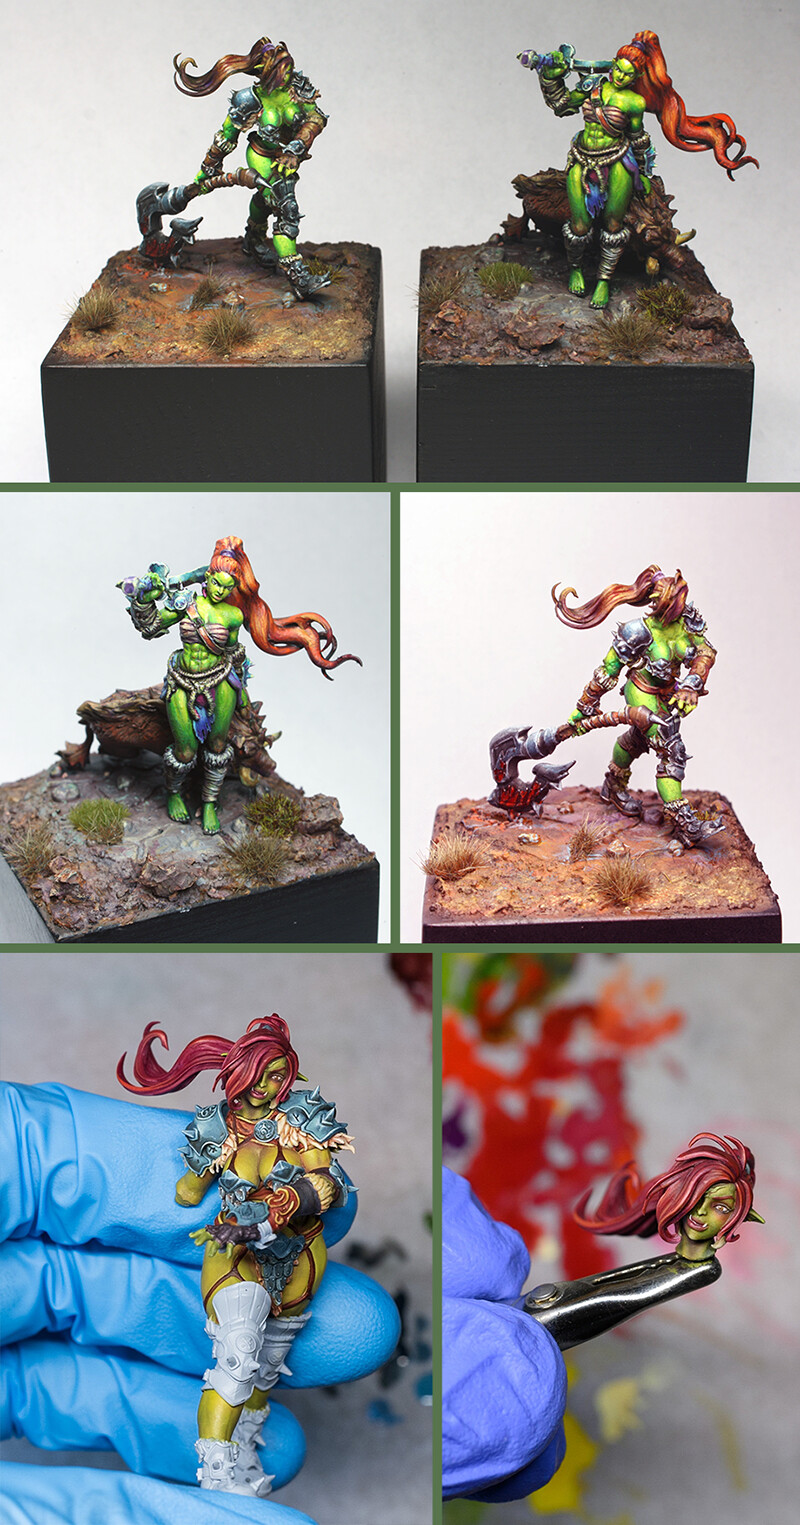 Paint jobs of the physical minis.